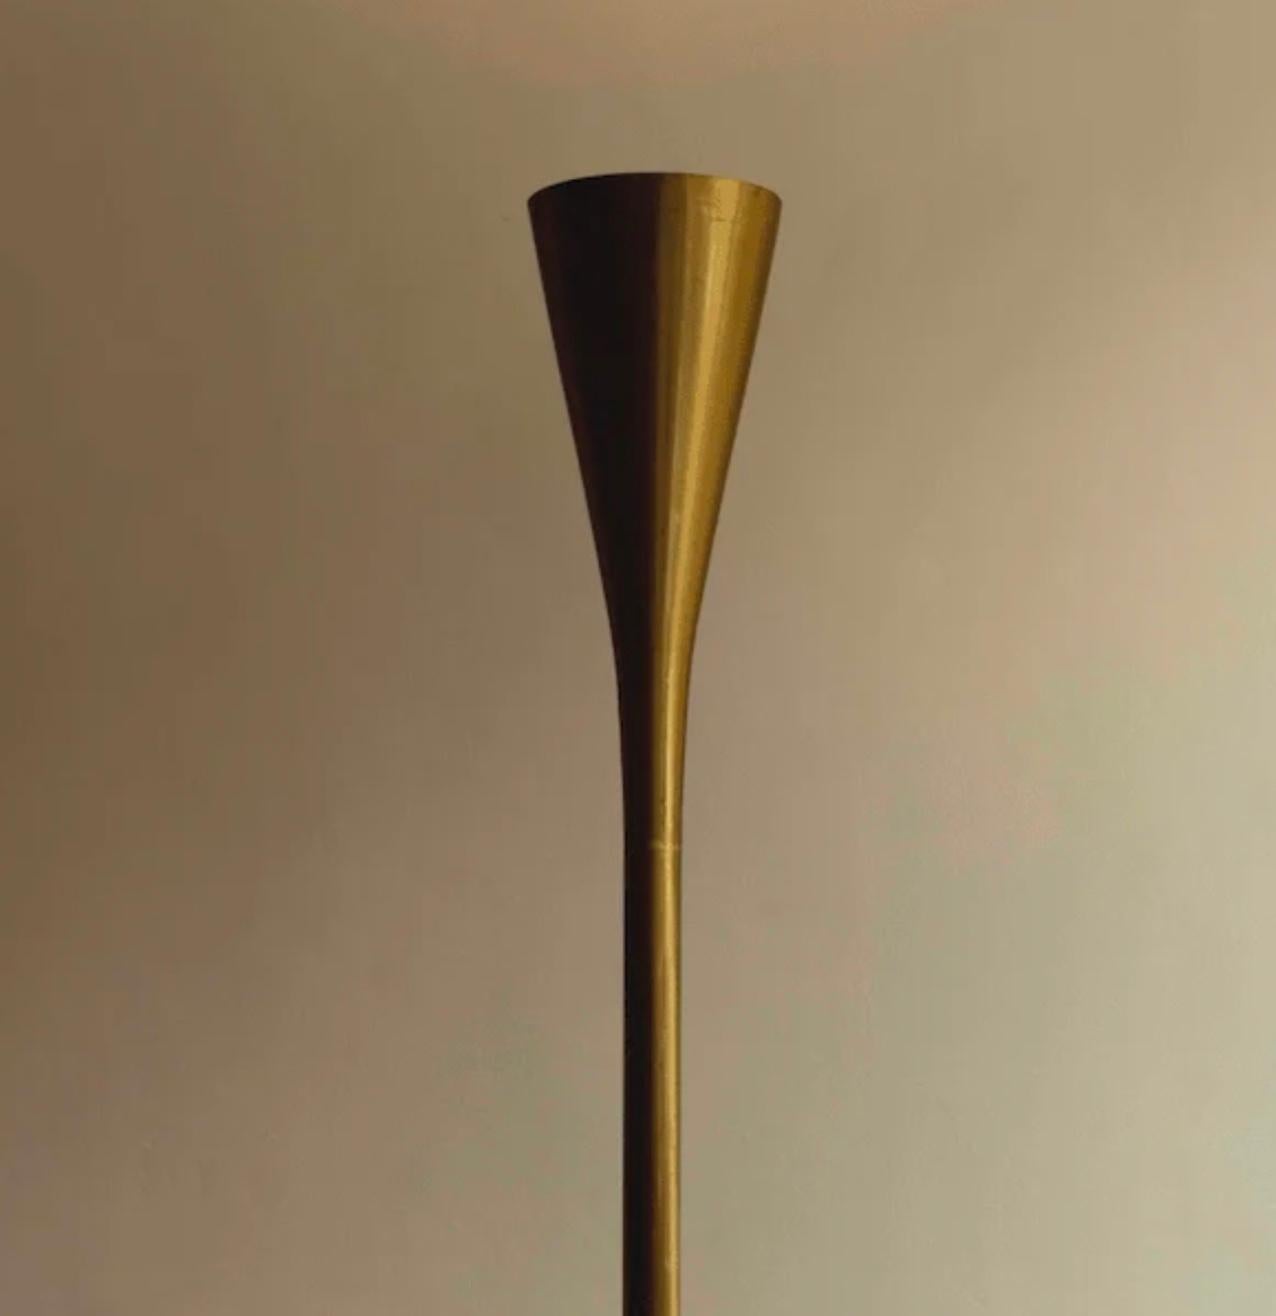 Pietro Chiesa Lacquered Brass ‘Luminator’ Floor Lamp In Good Condition For Sale In London, GB